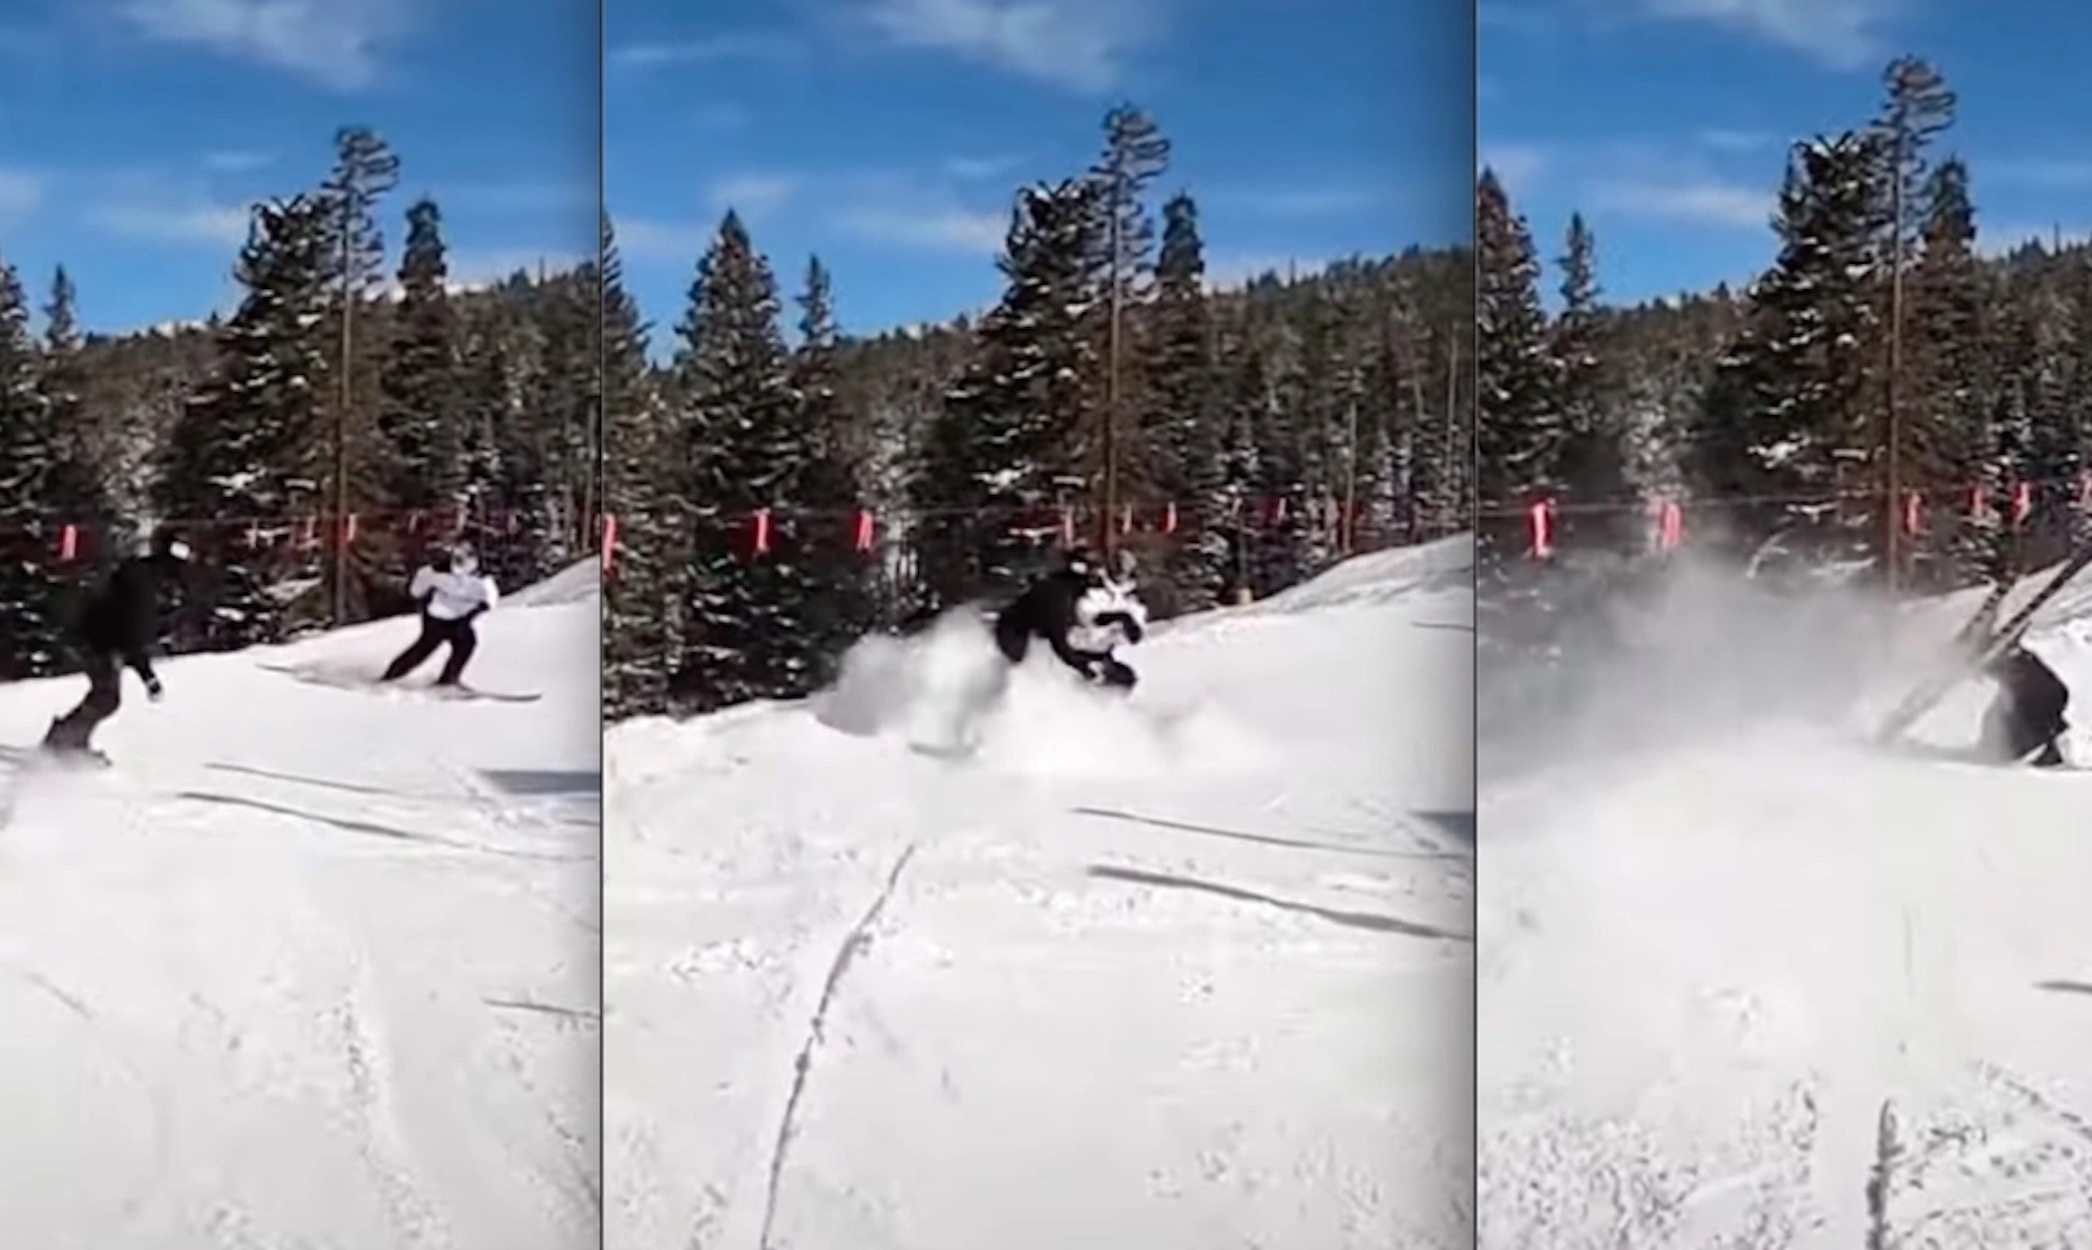 Who's At Fault In This Snowboarder & Skier Collision At Keystone?